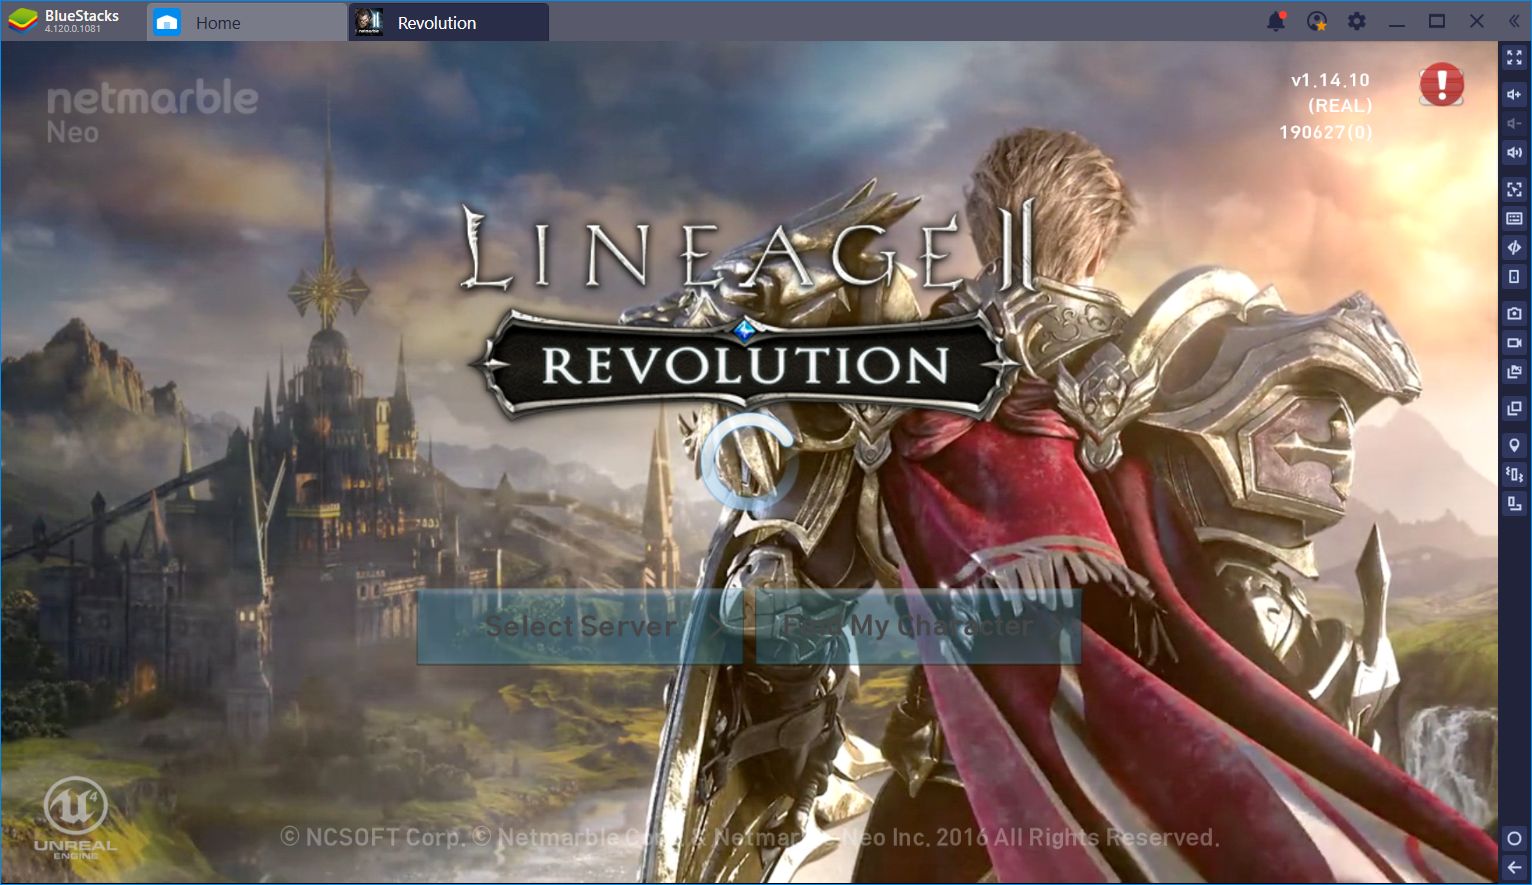 Kamael, Dual Class, and More in Lineage 2 Revolution’s Newest Update